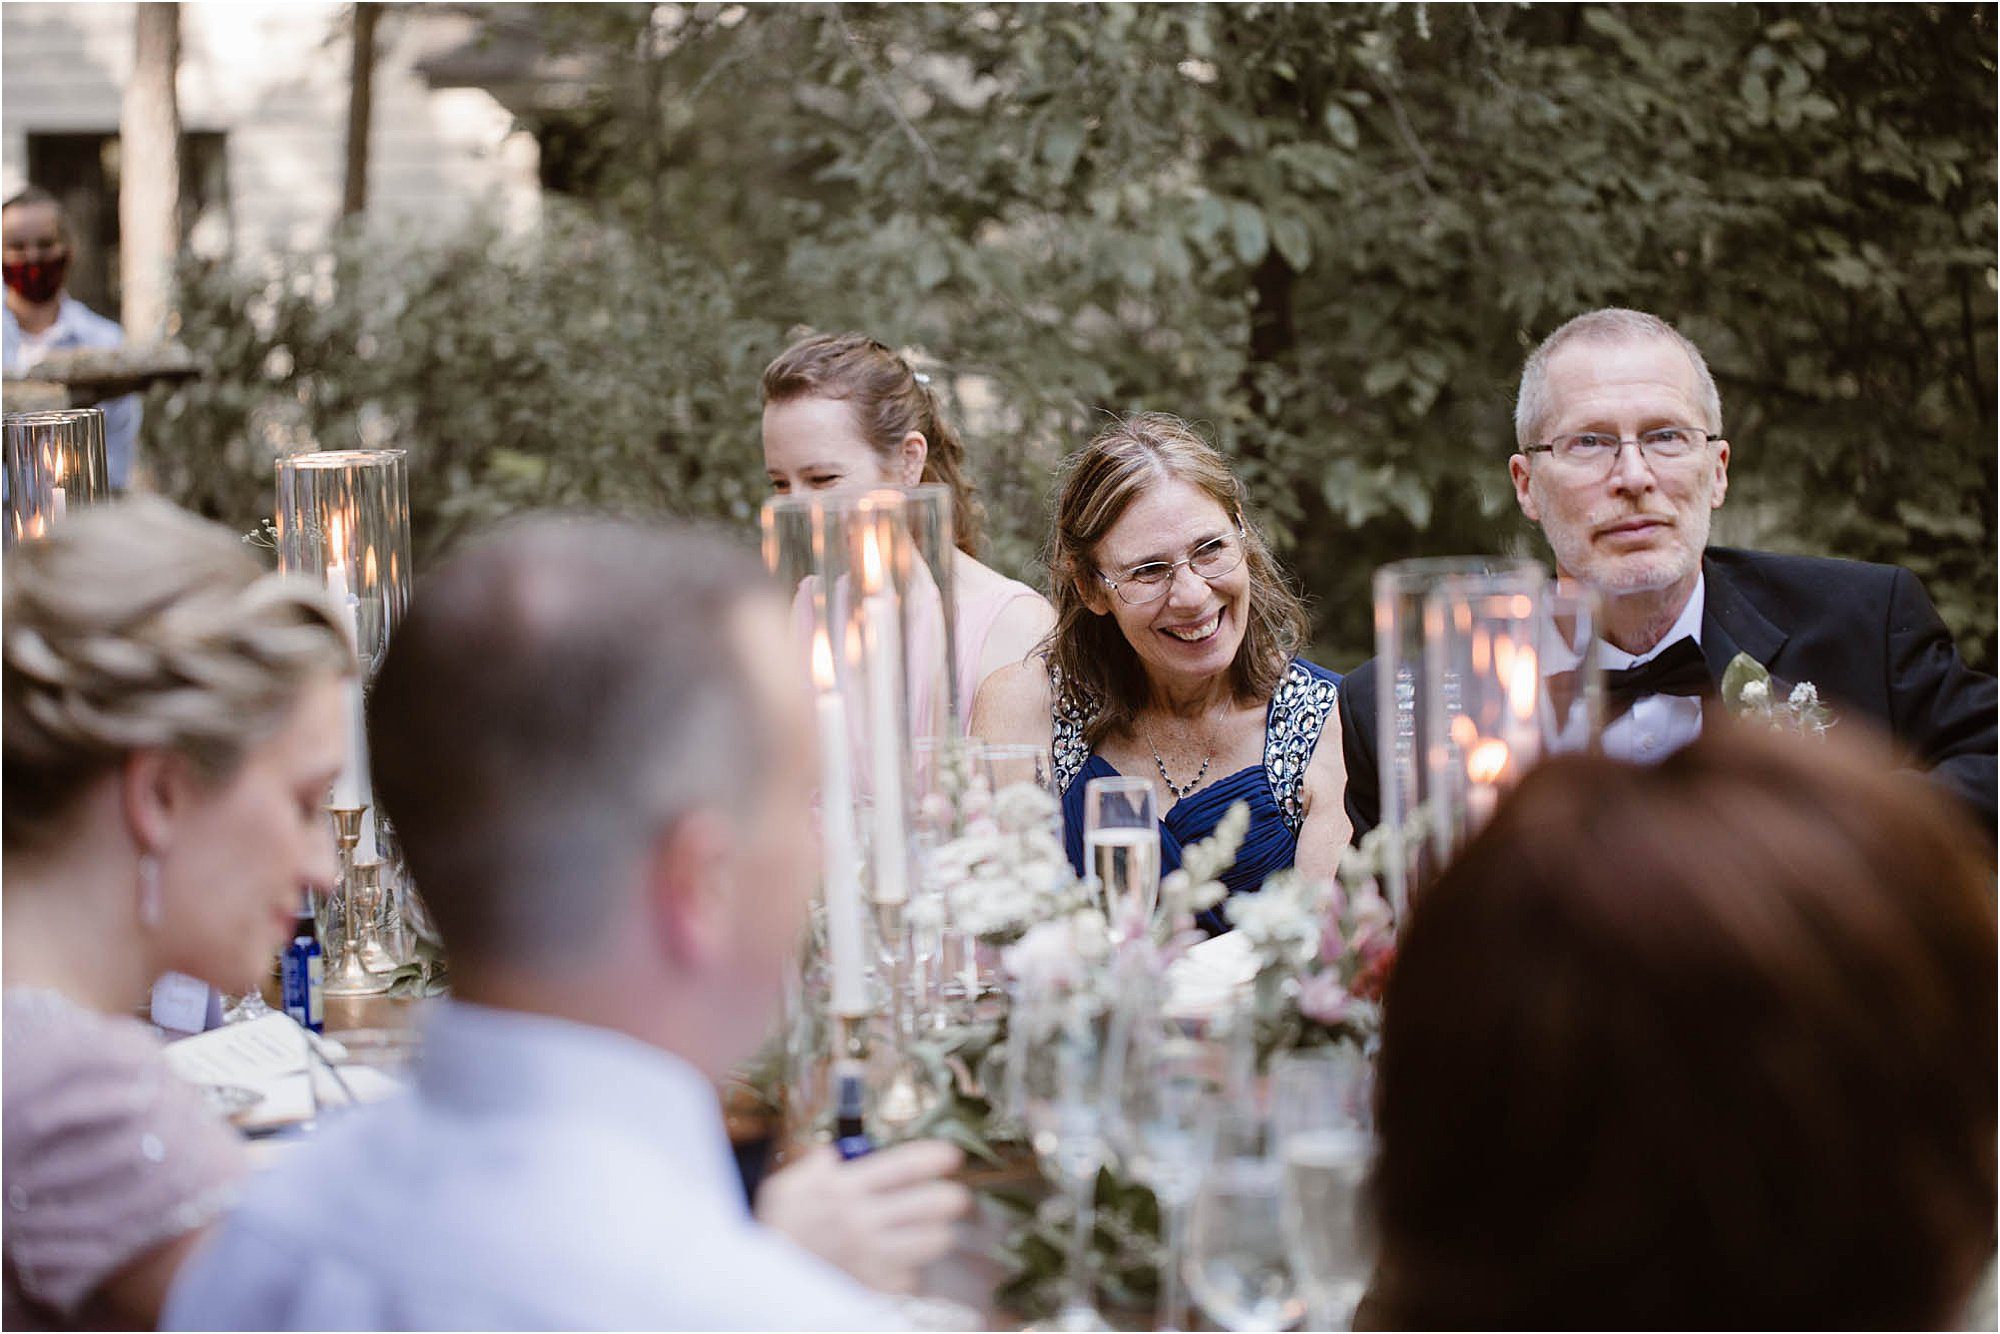 guests laughing at reception table at wedding